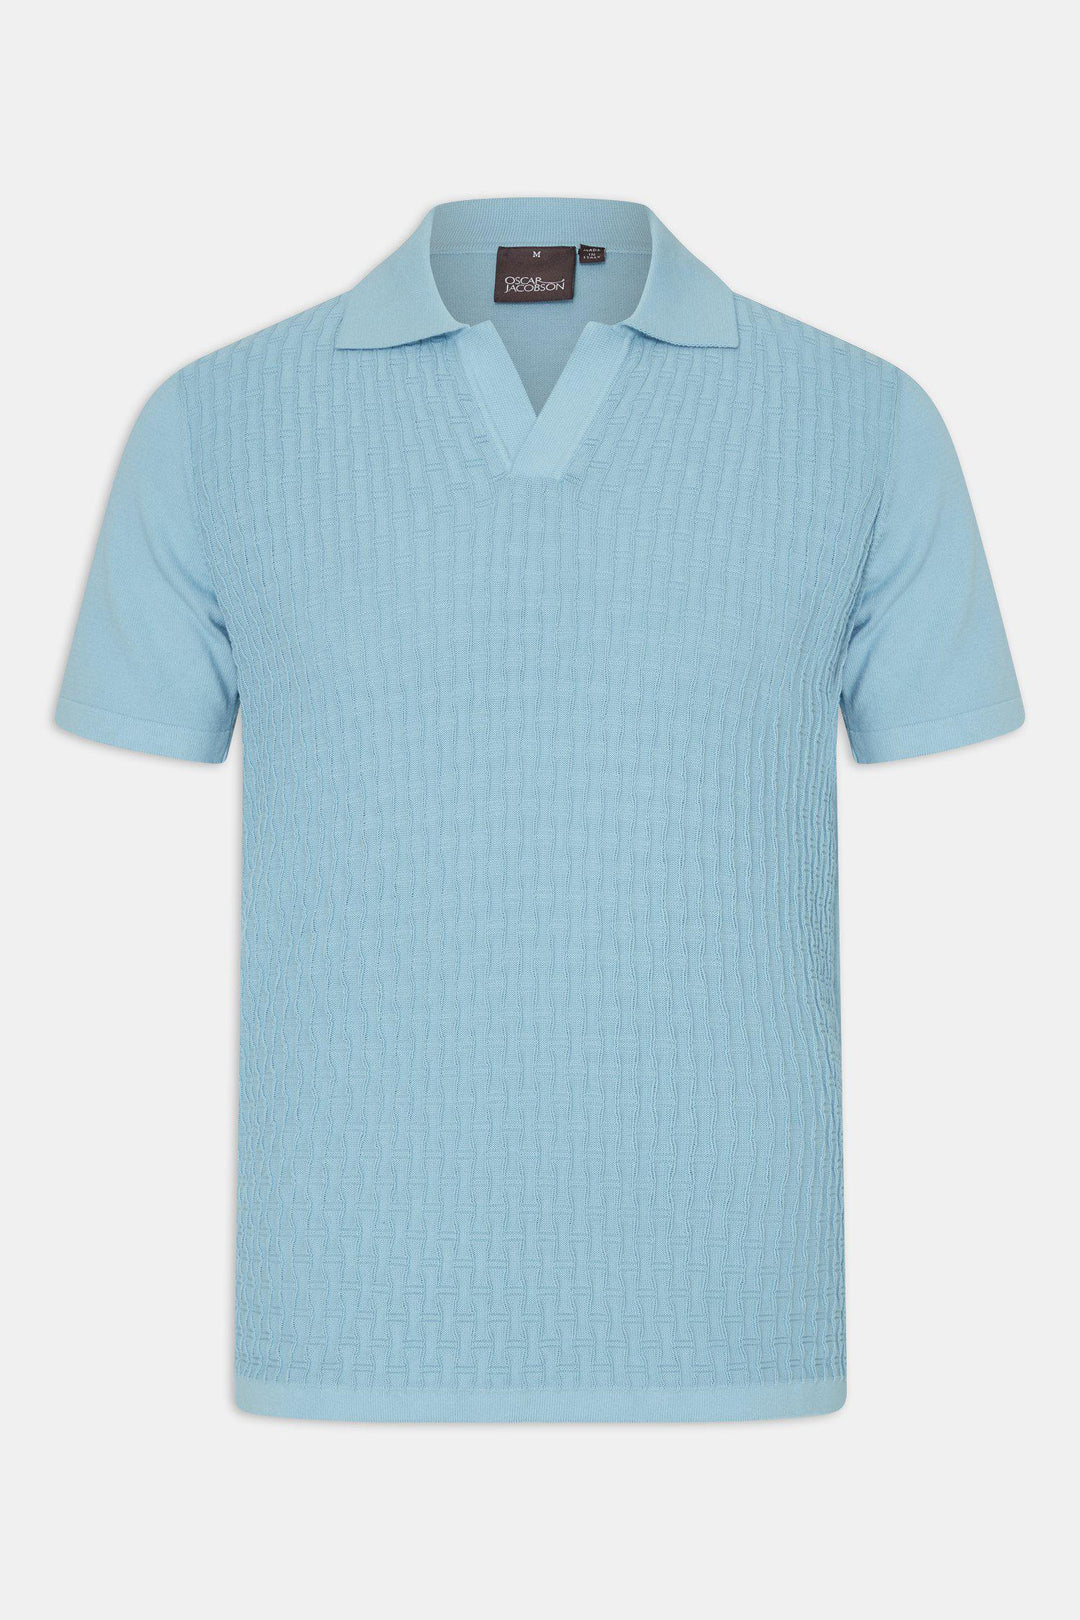 OSCAR JACOBSON - Mike Structured Poloshirt - Dale